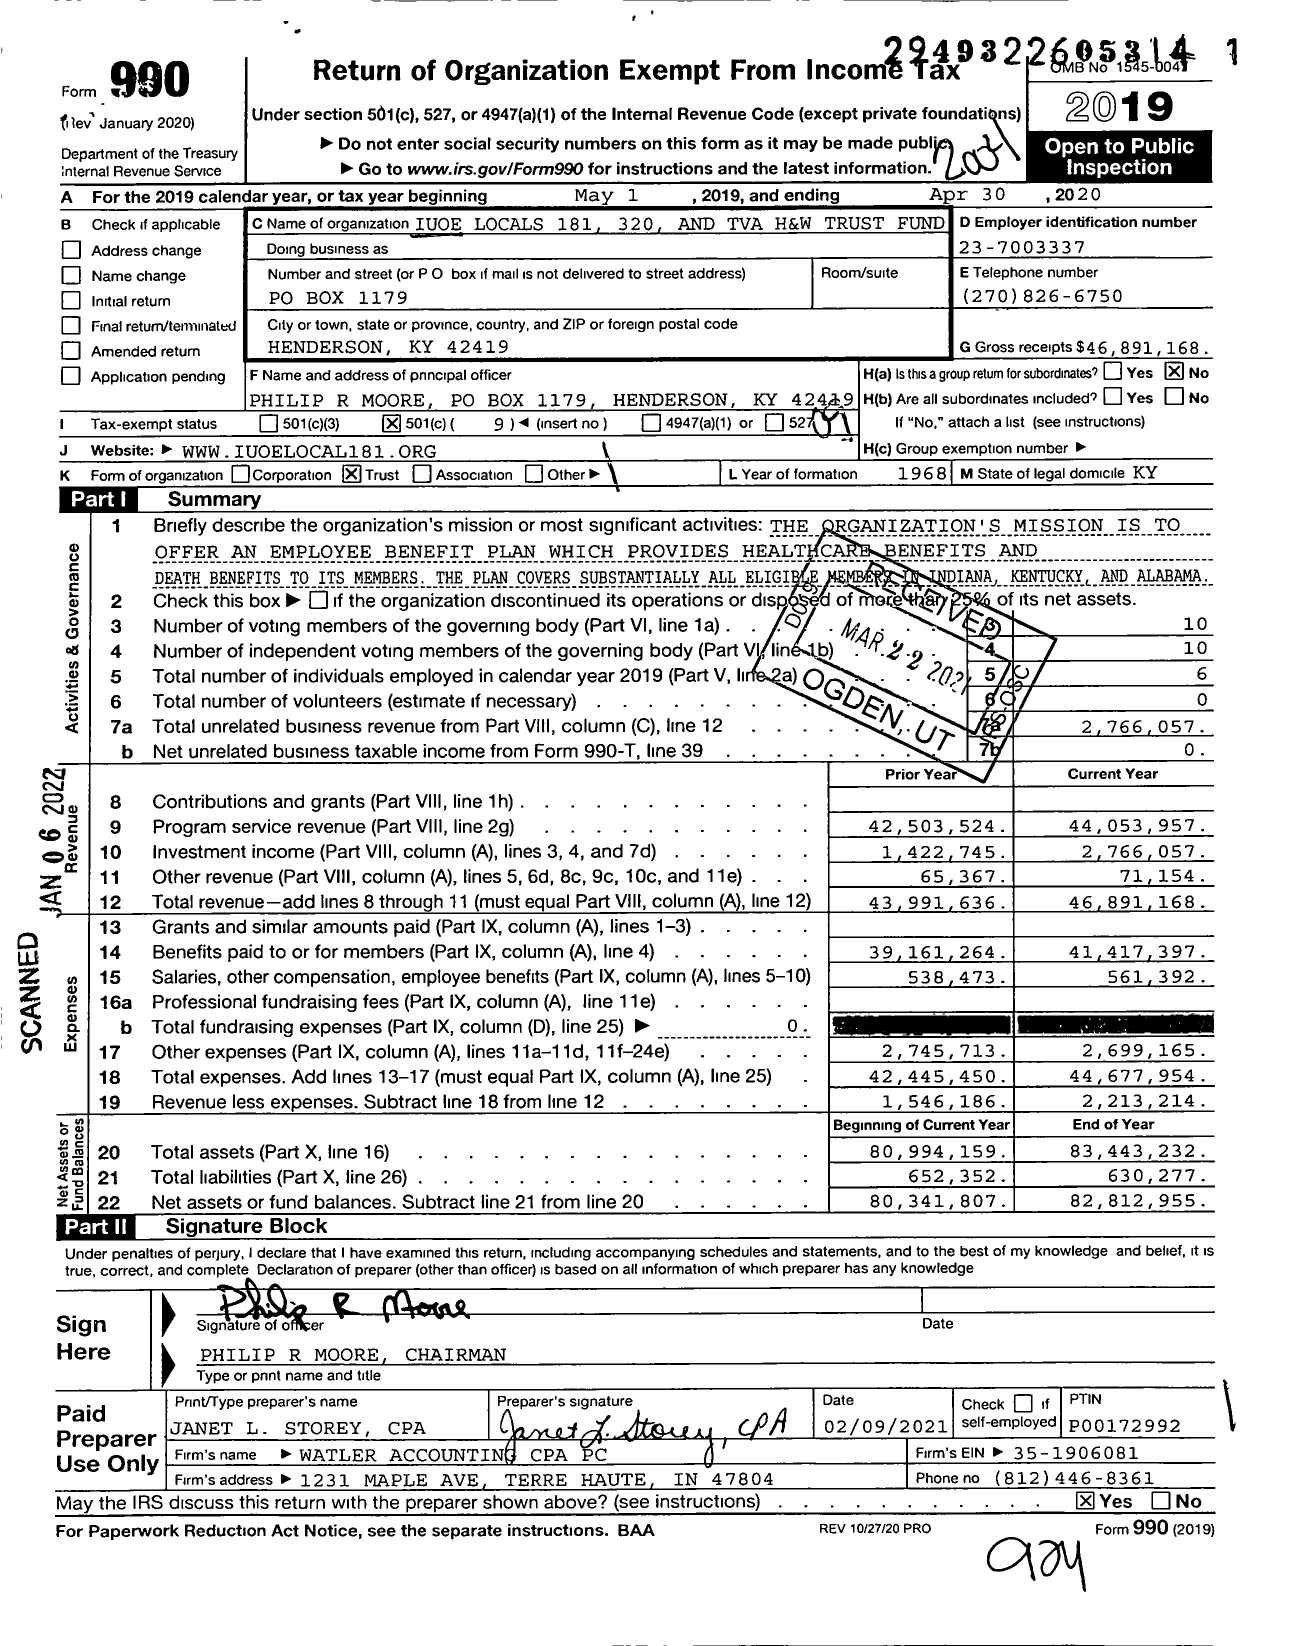 Image of first page of 2019 Form 990O for Iuoe Locals 181 320 and Tva H&W Trust Fund